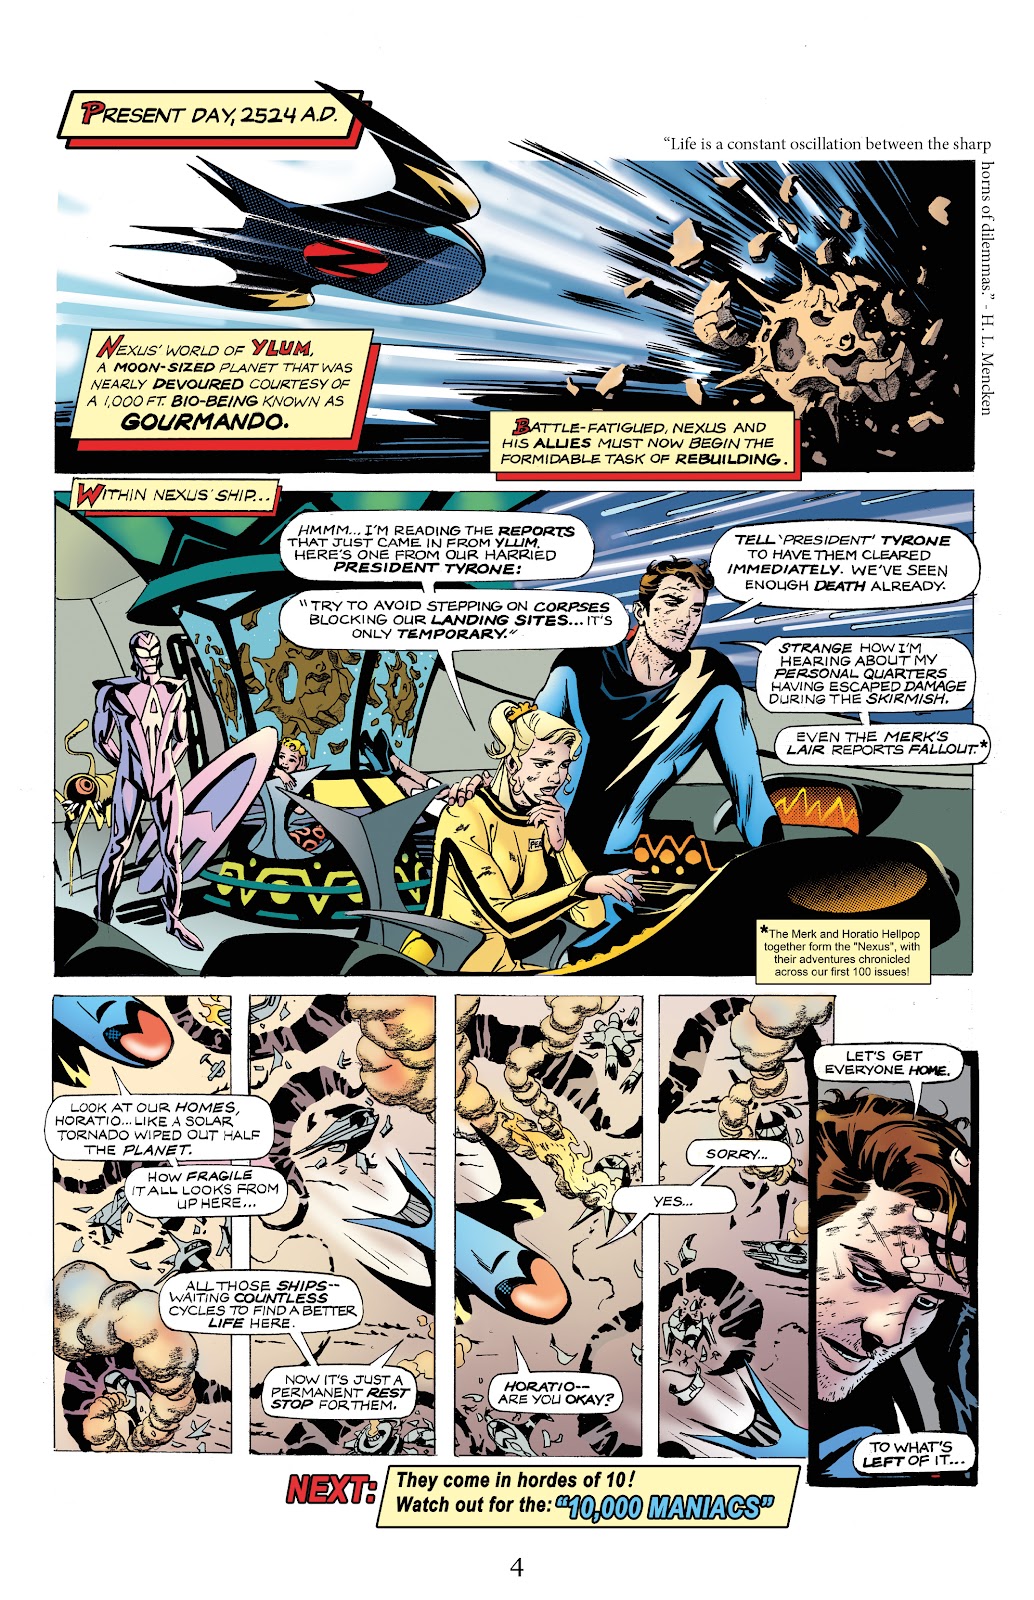 Nexus Newspaper Strips Vol 2: The Battle For Thuneworld issue 1 - Page 6